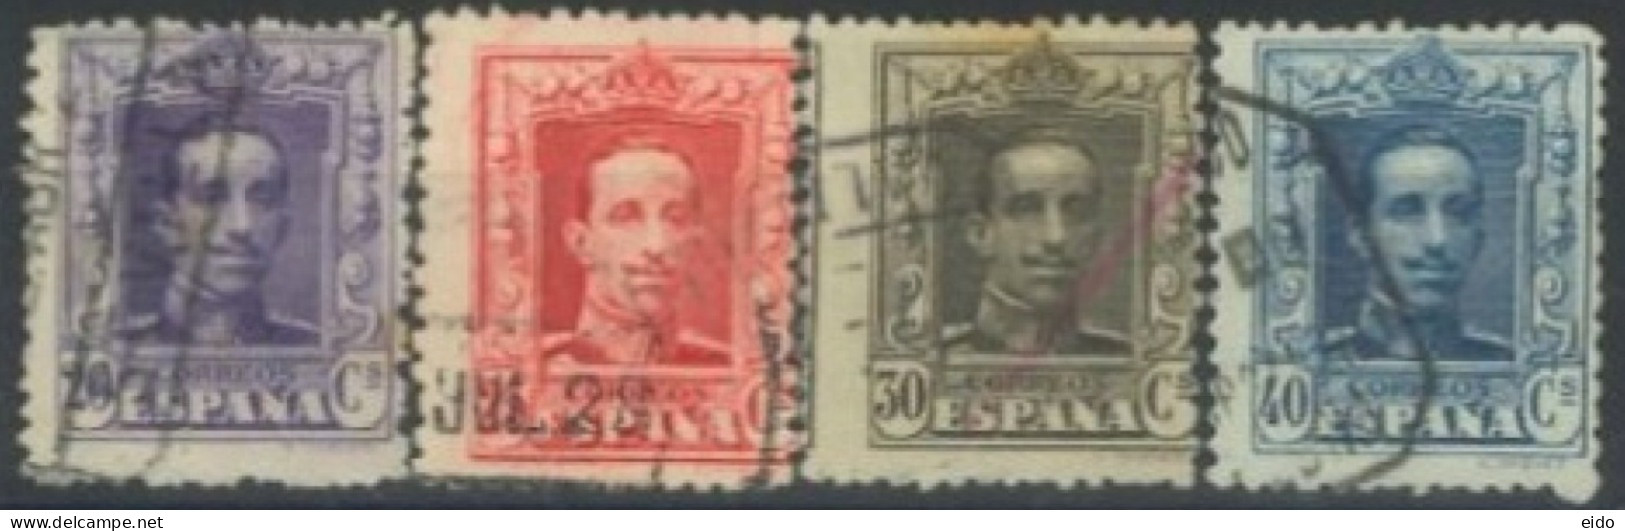 SPAIN, 1922/26, KING ALFONSO XIII STAMPS SET OF 4 # 337/40, USED. - Usati